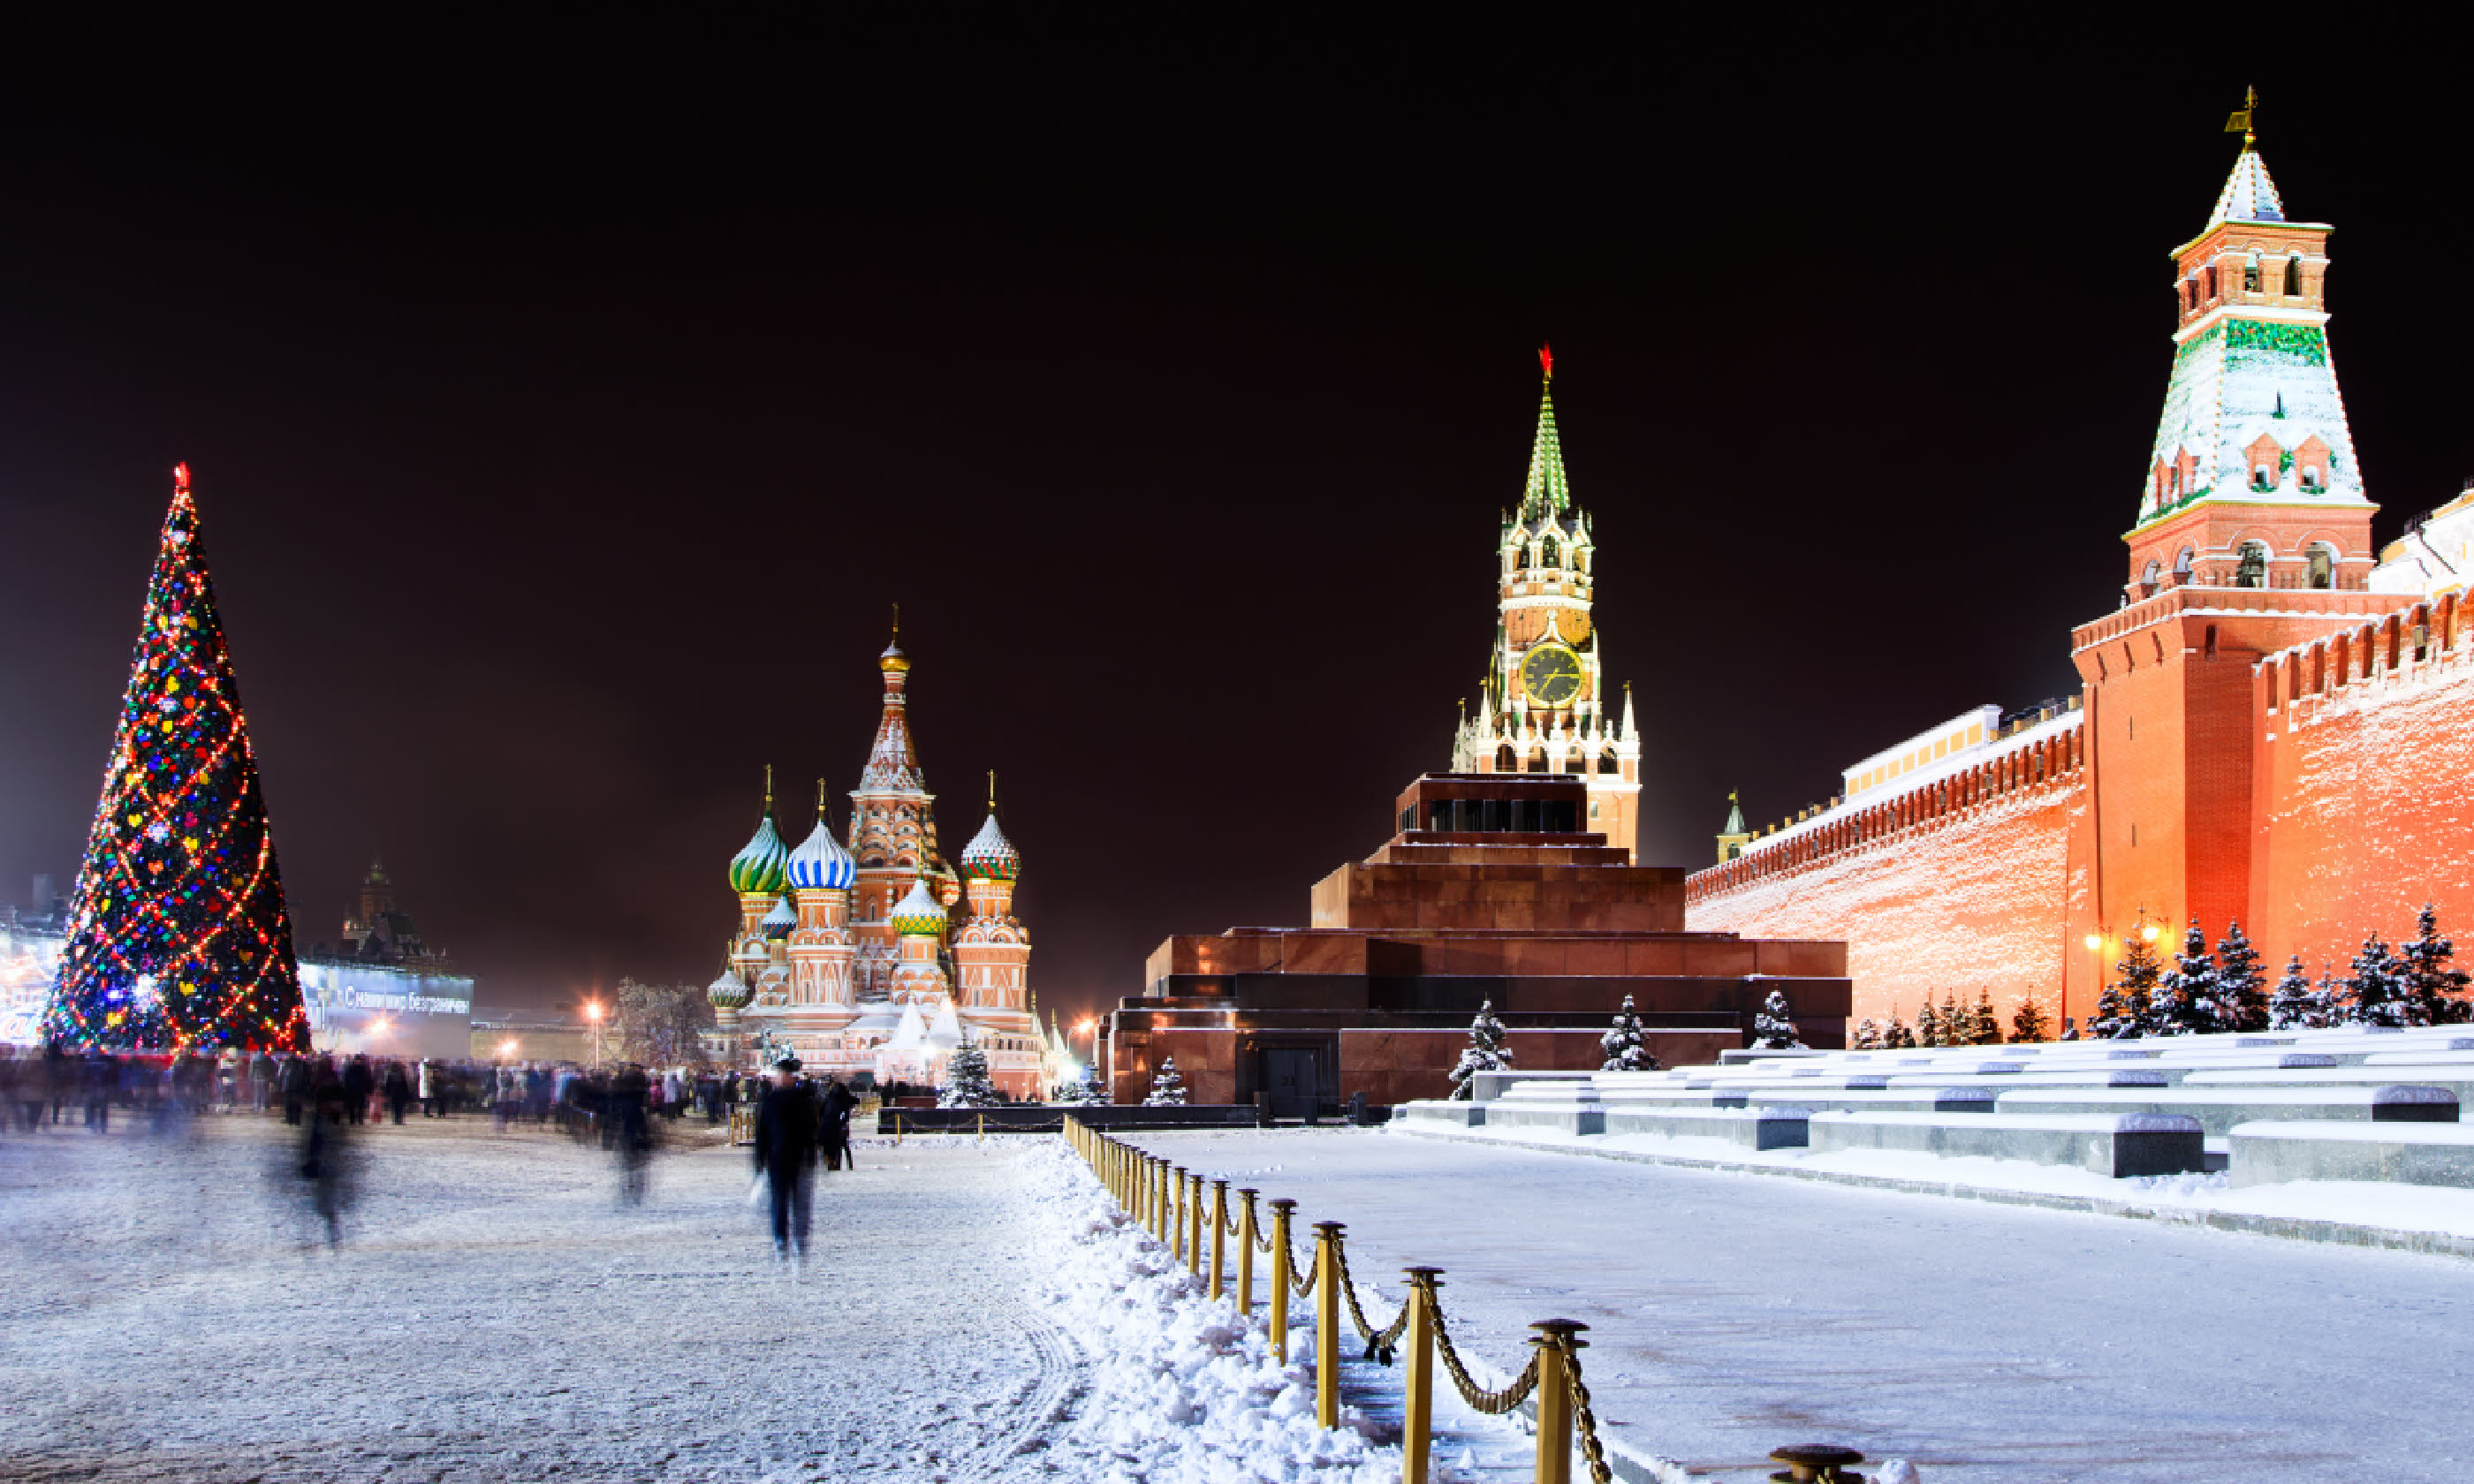 Night view of the Red Square (Shutterstock)